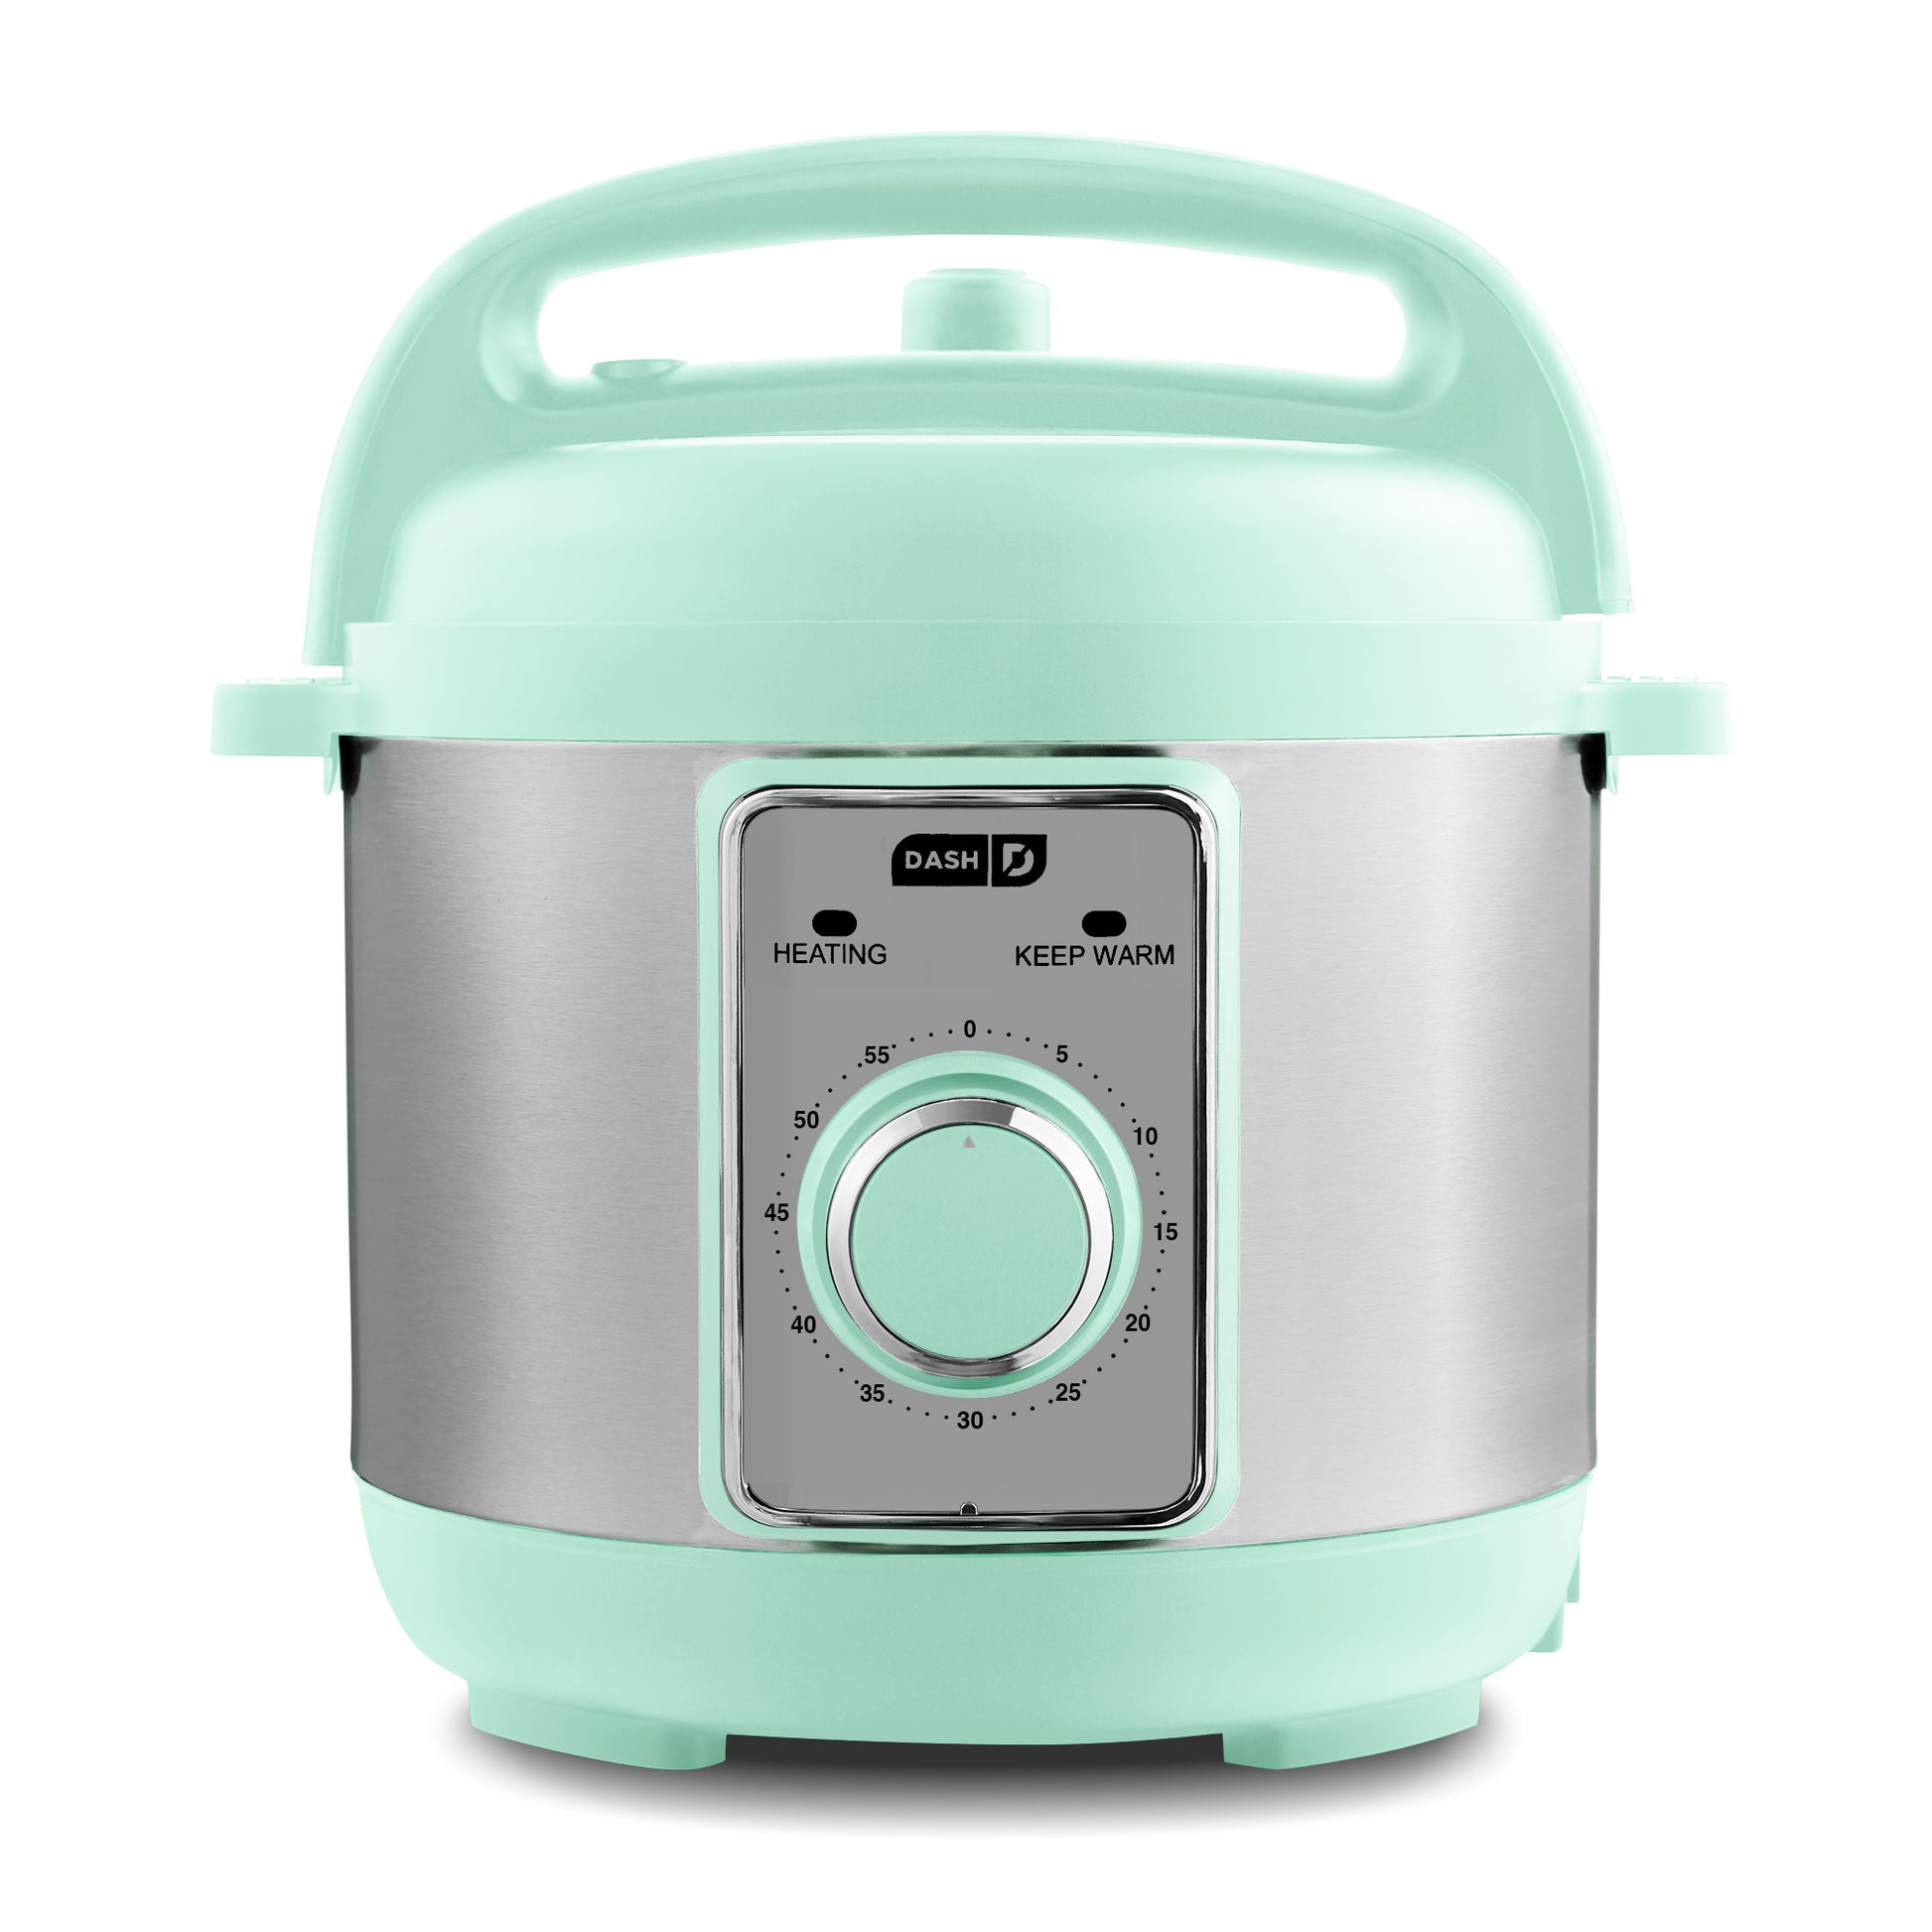 Instant Pot Duo Plus Mini is on sale for $45 off at